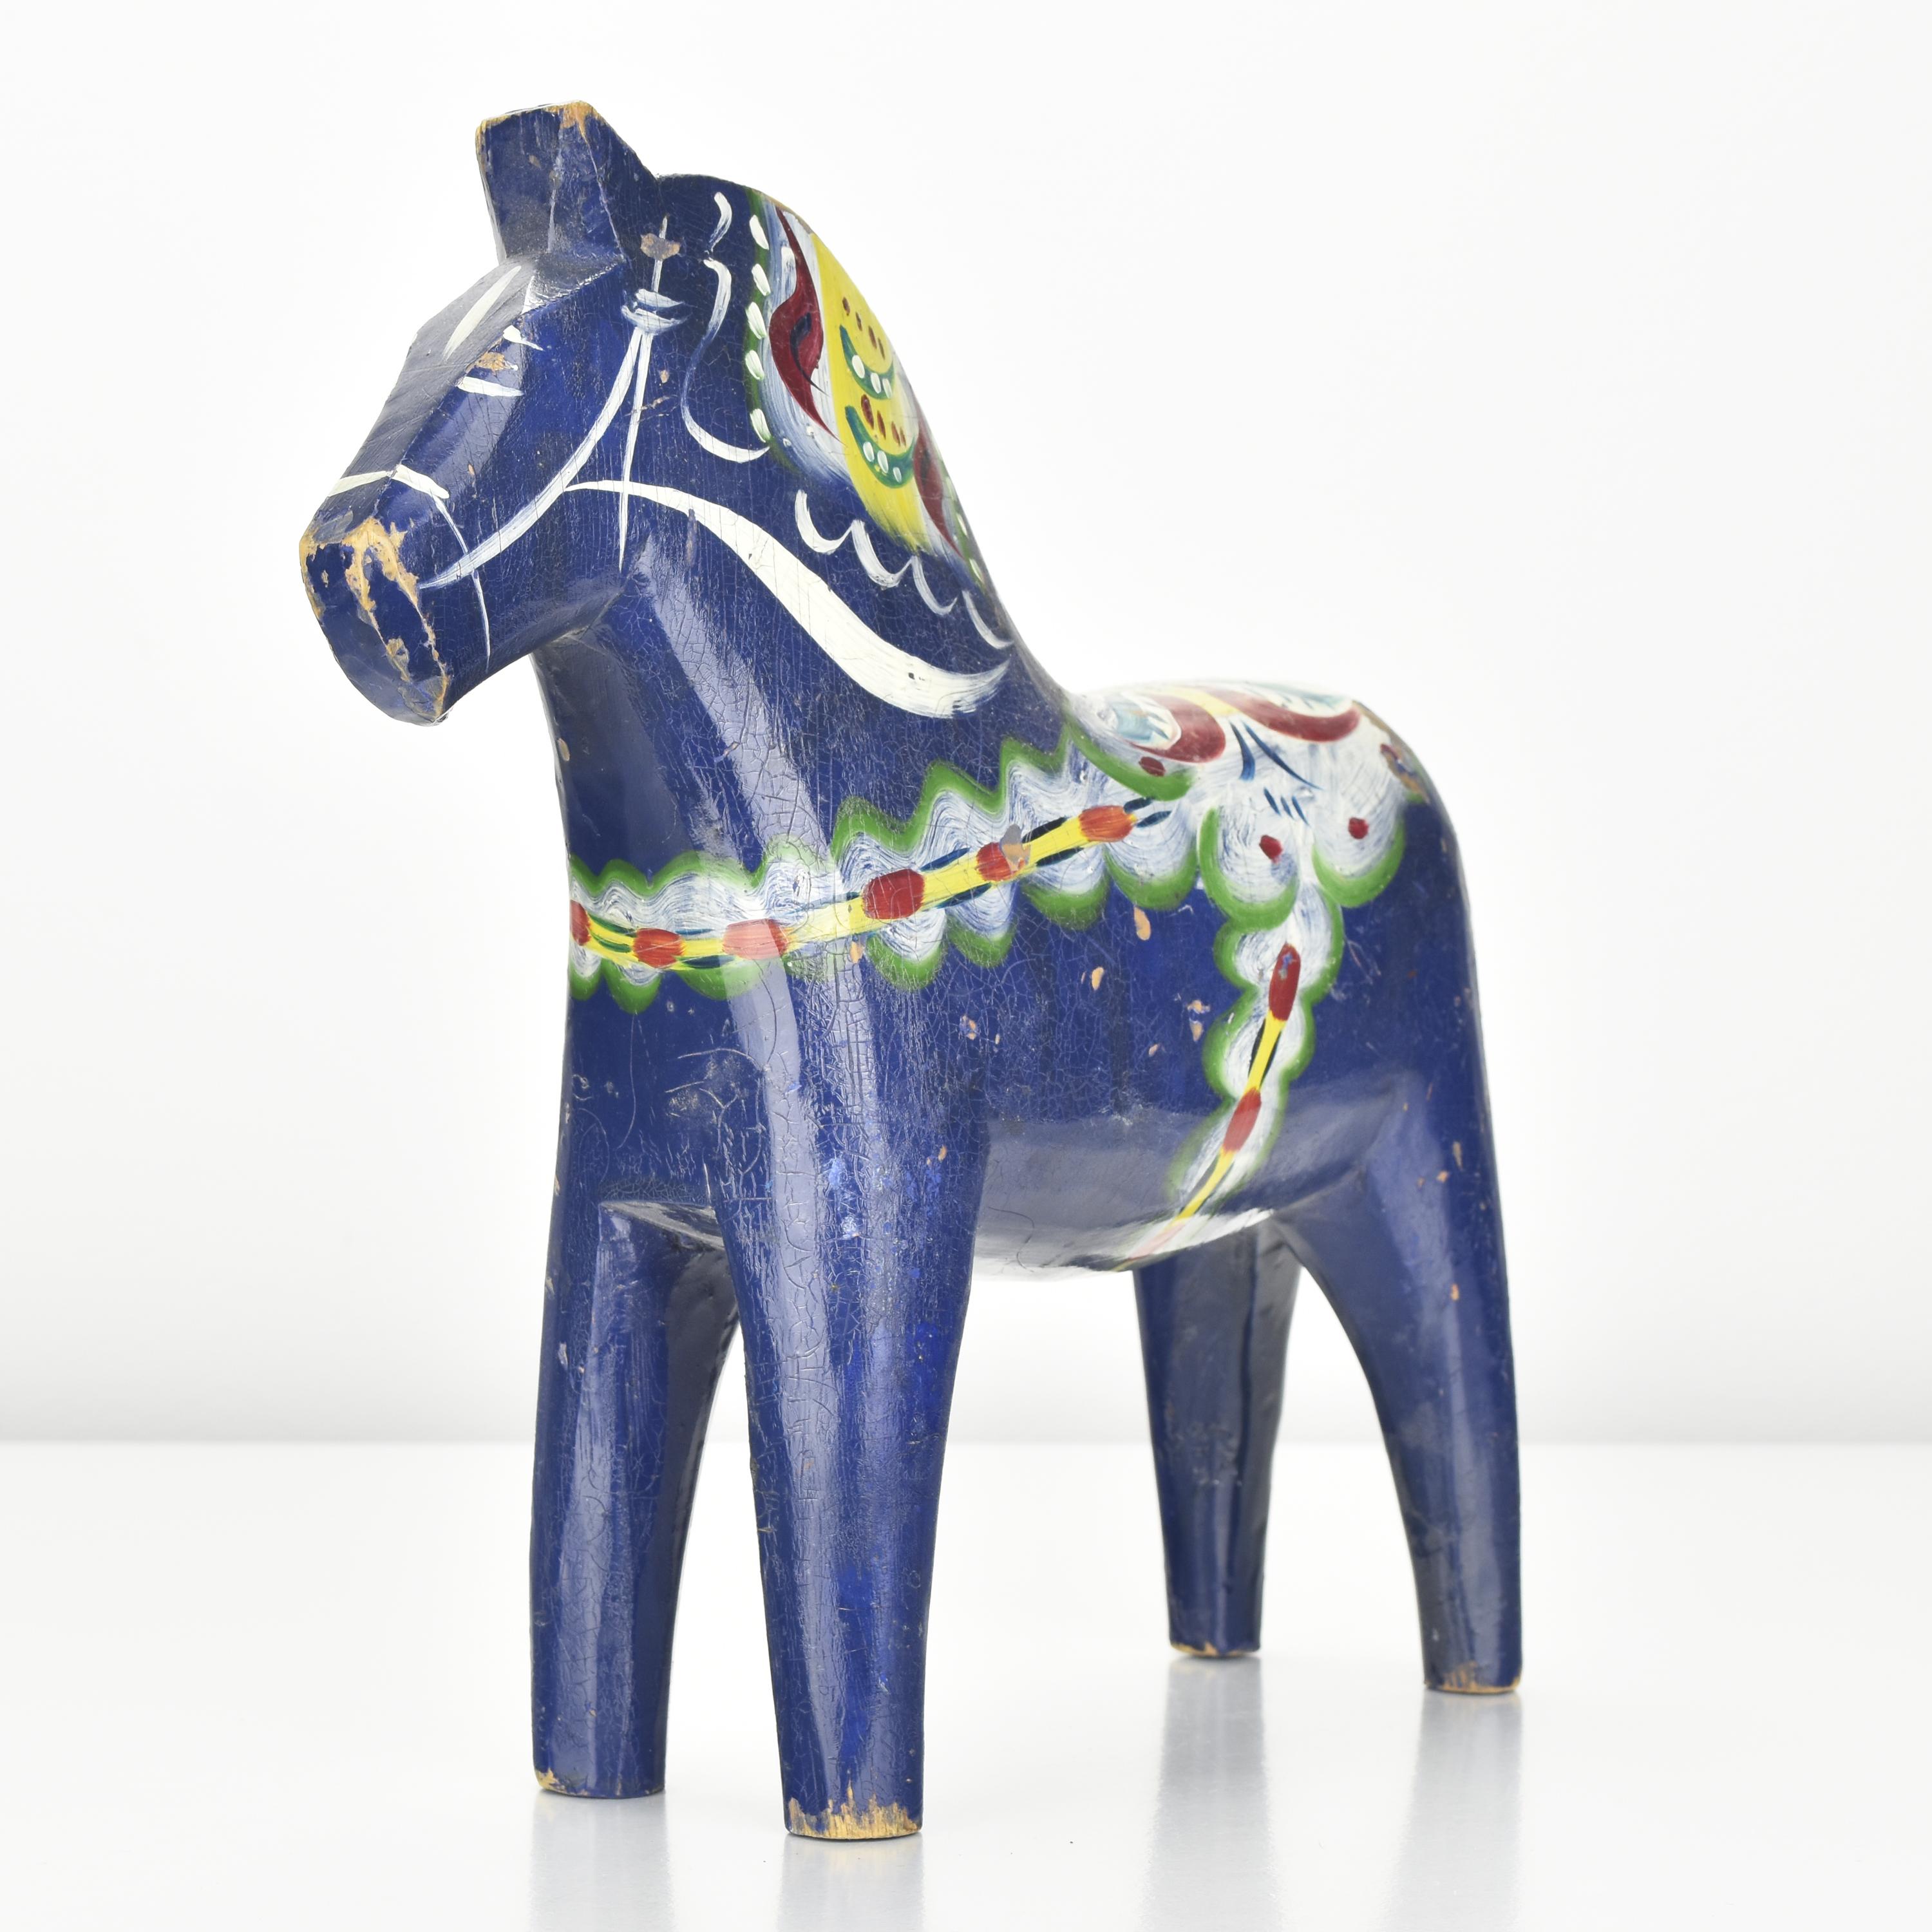 Folk Art Early 1930s Swedish Dala Horse Figurine by Nils Olsson Carved Painted Wood For Sale